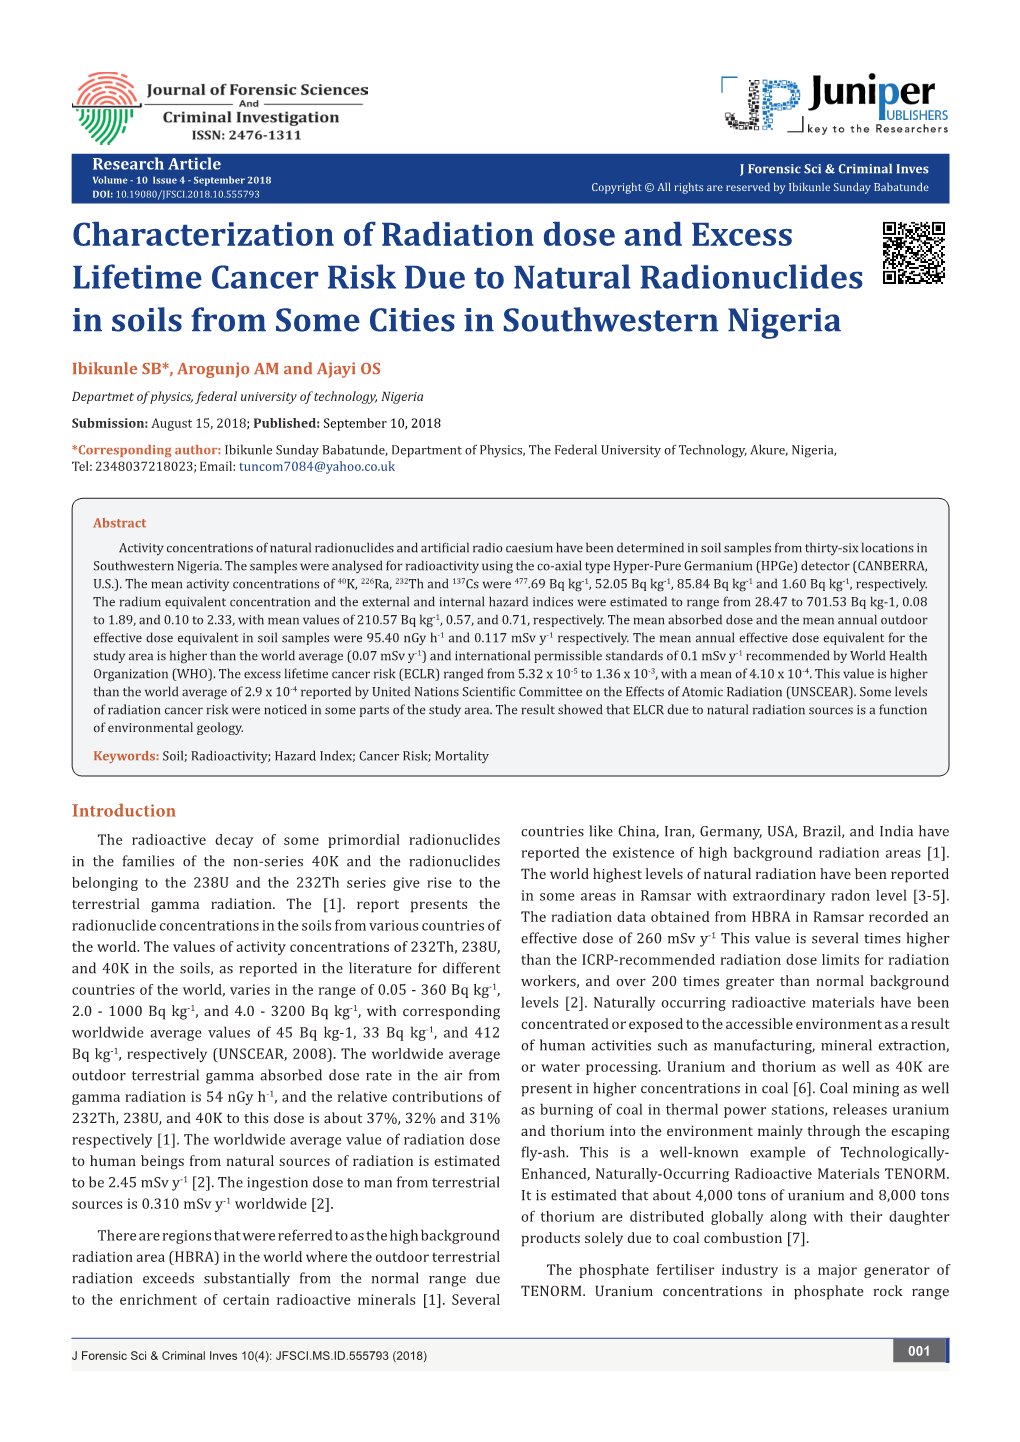 Characterization of Radiation Dose and Excess Lifetime Cancer Risk Due to Natural Radionuclides in Soils from Some Cities in Southwestern Nigeria